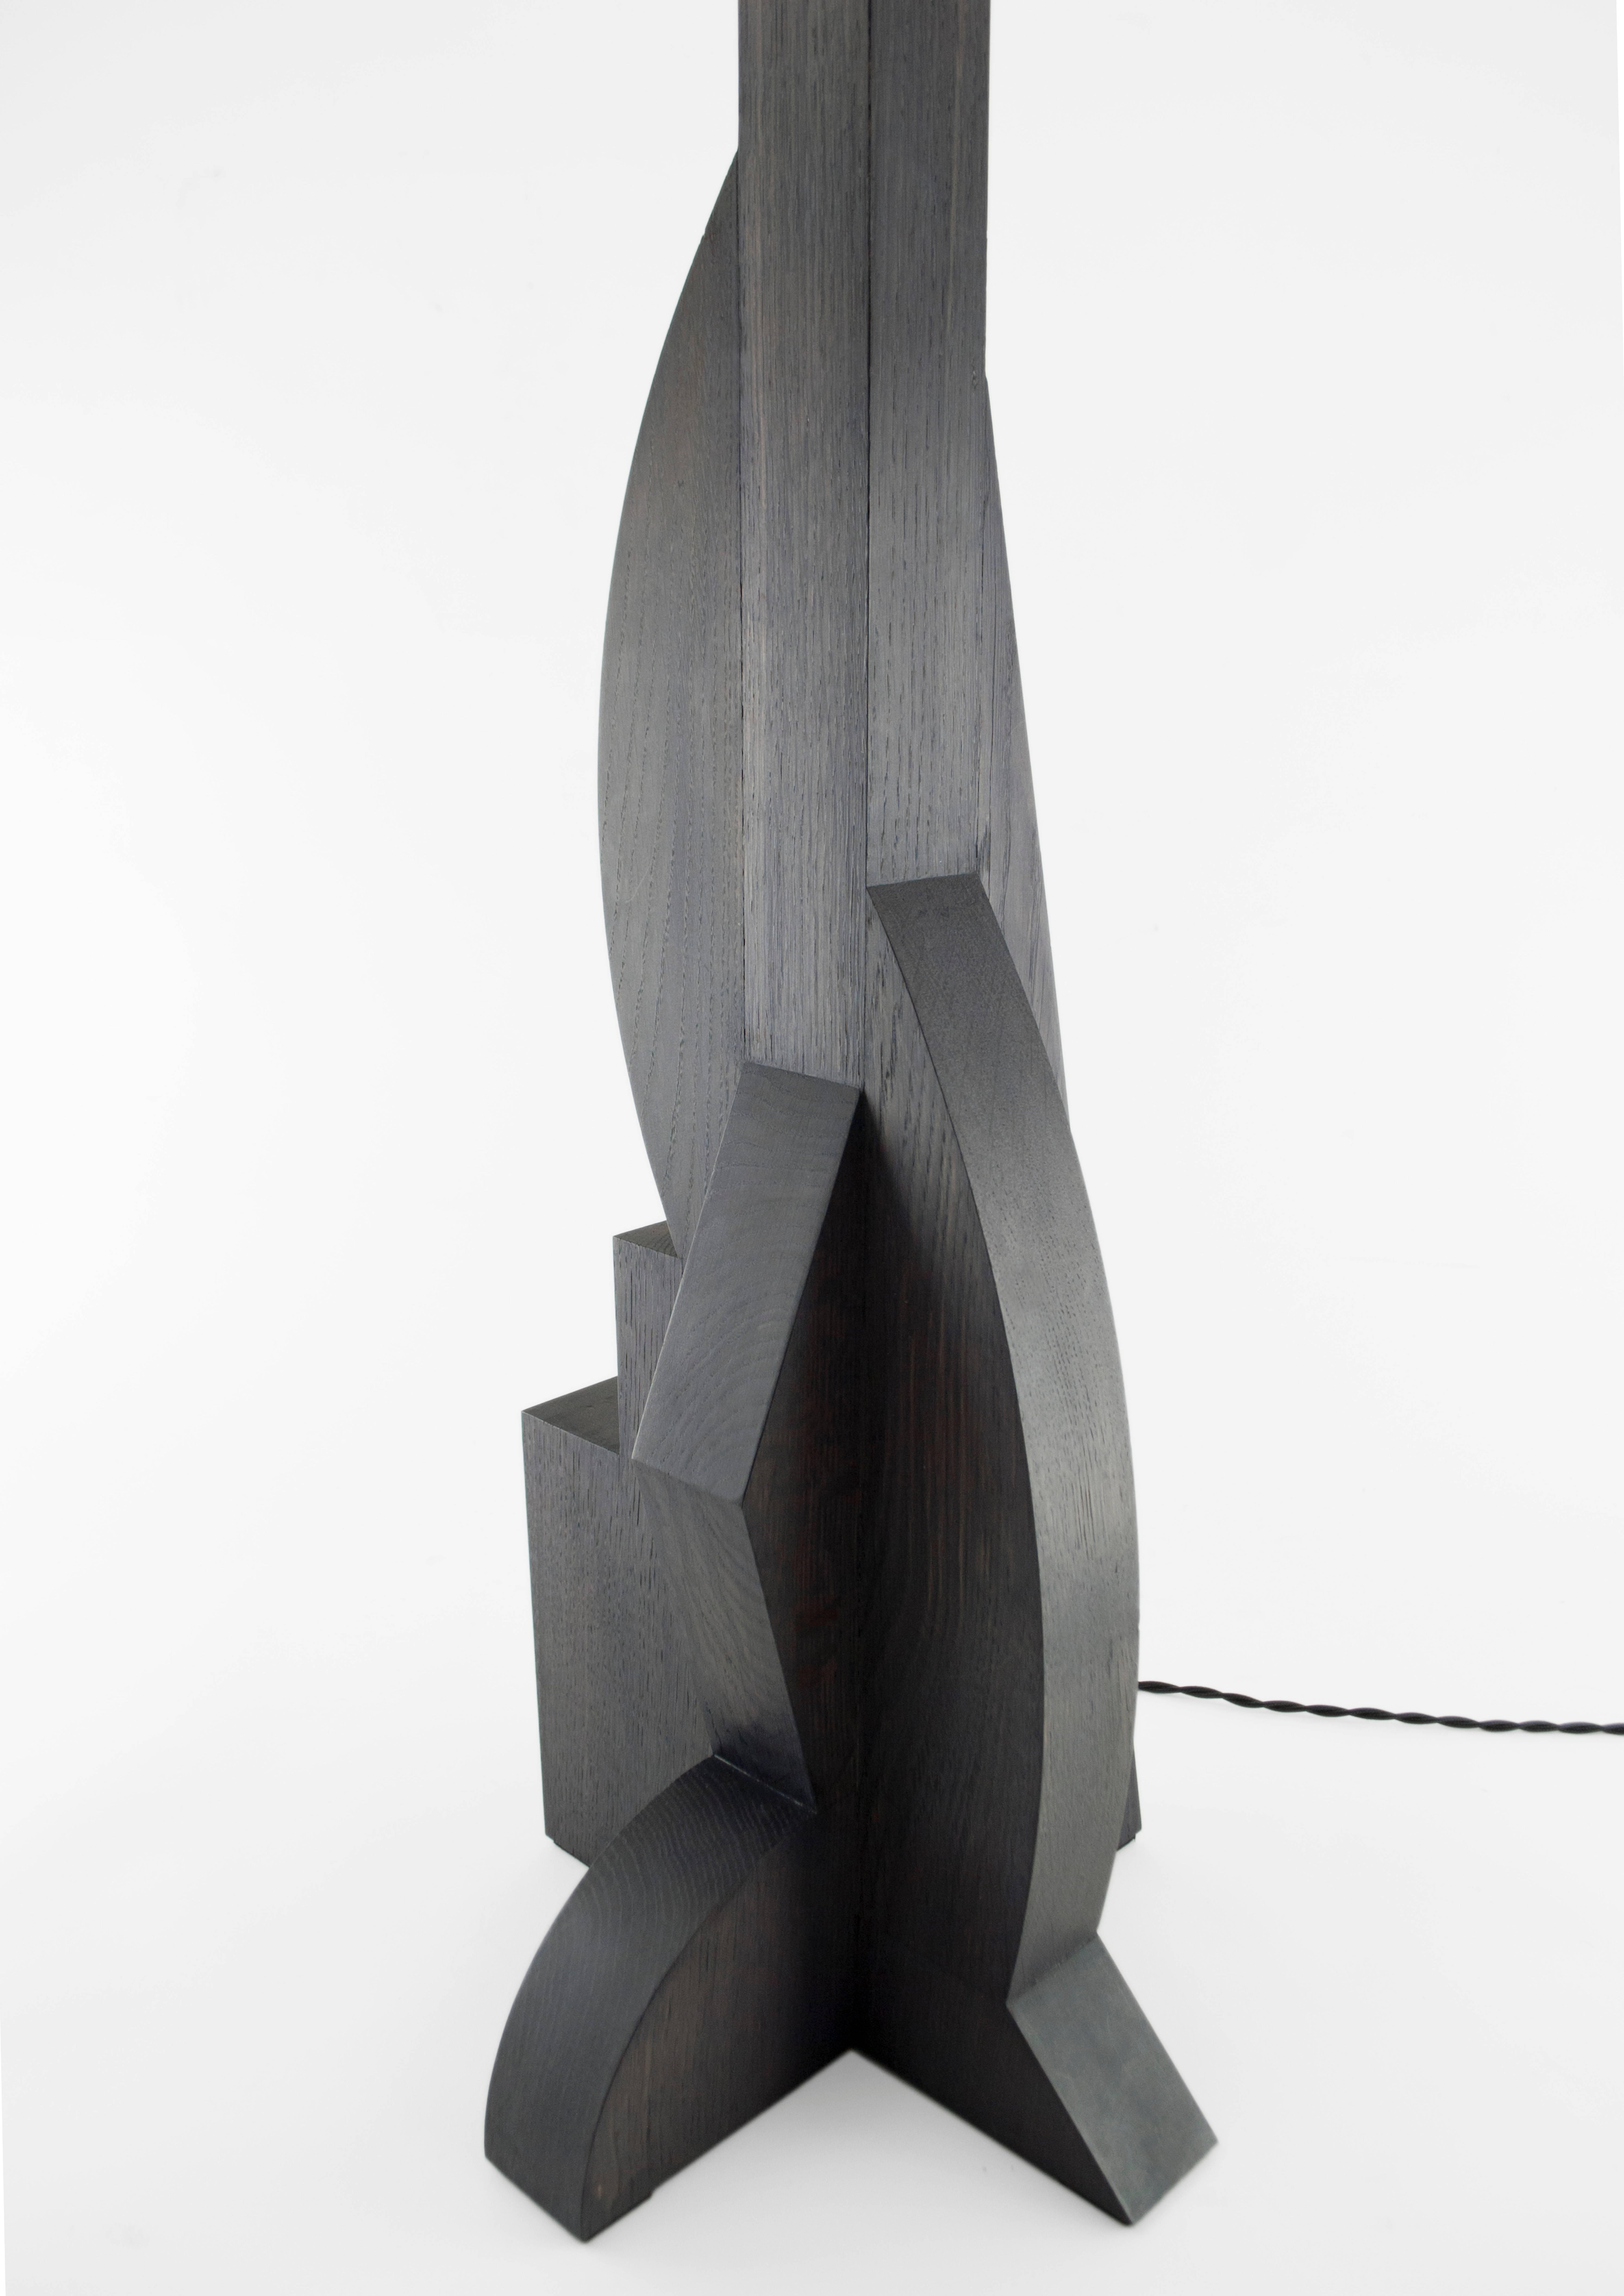 Ebonized Contemporary Tower Floor Lamp with Geometric Oak Base and Japanese Paper Shade